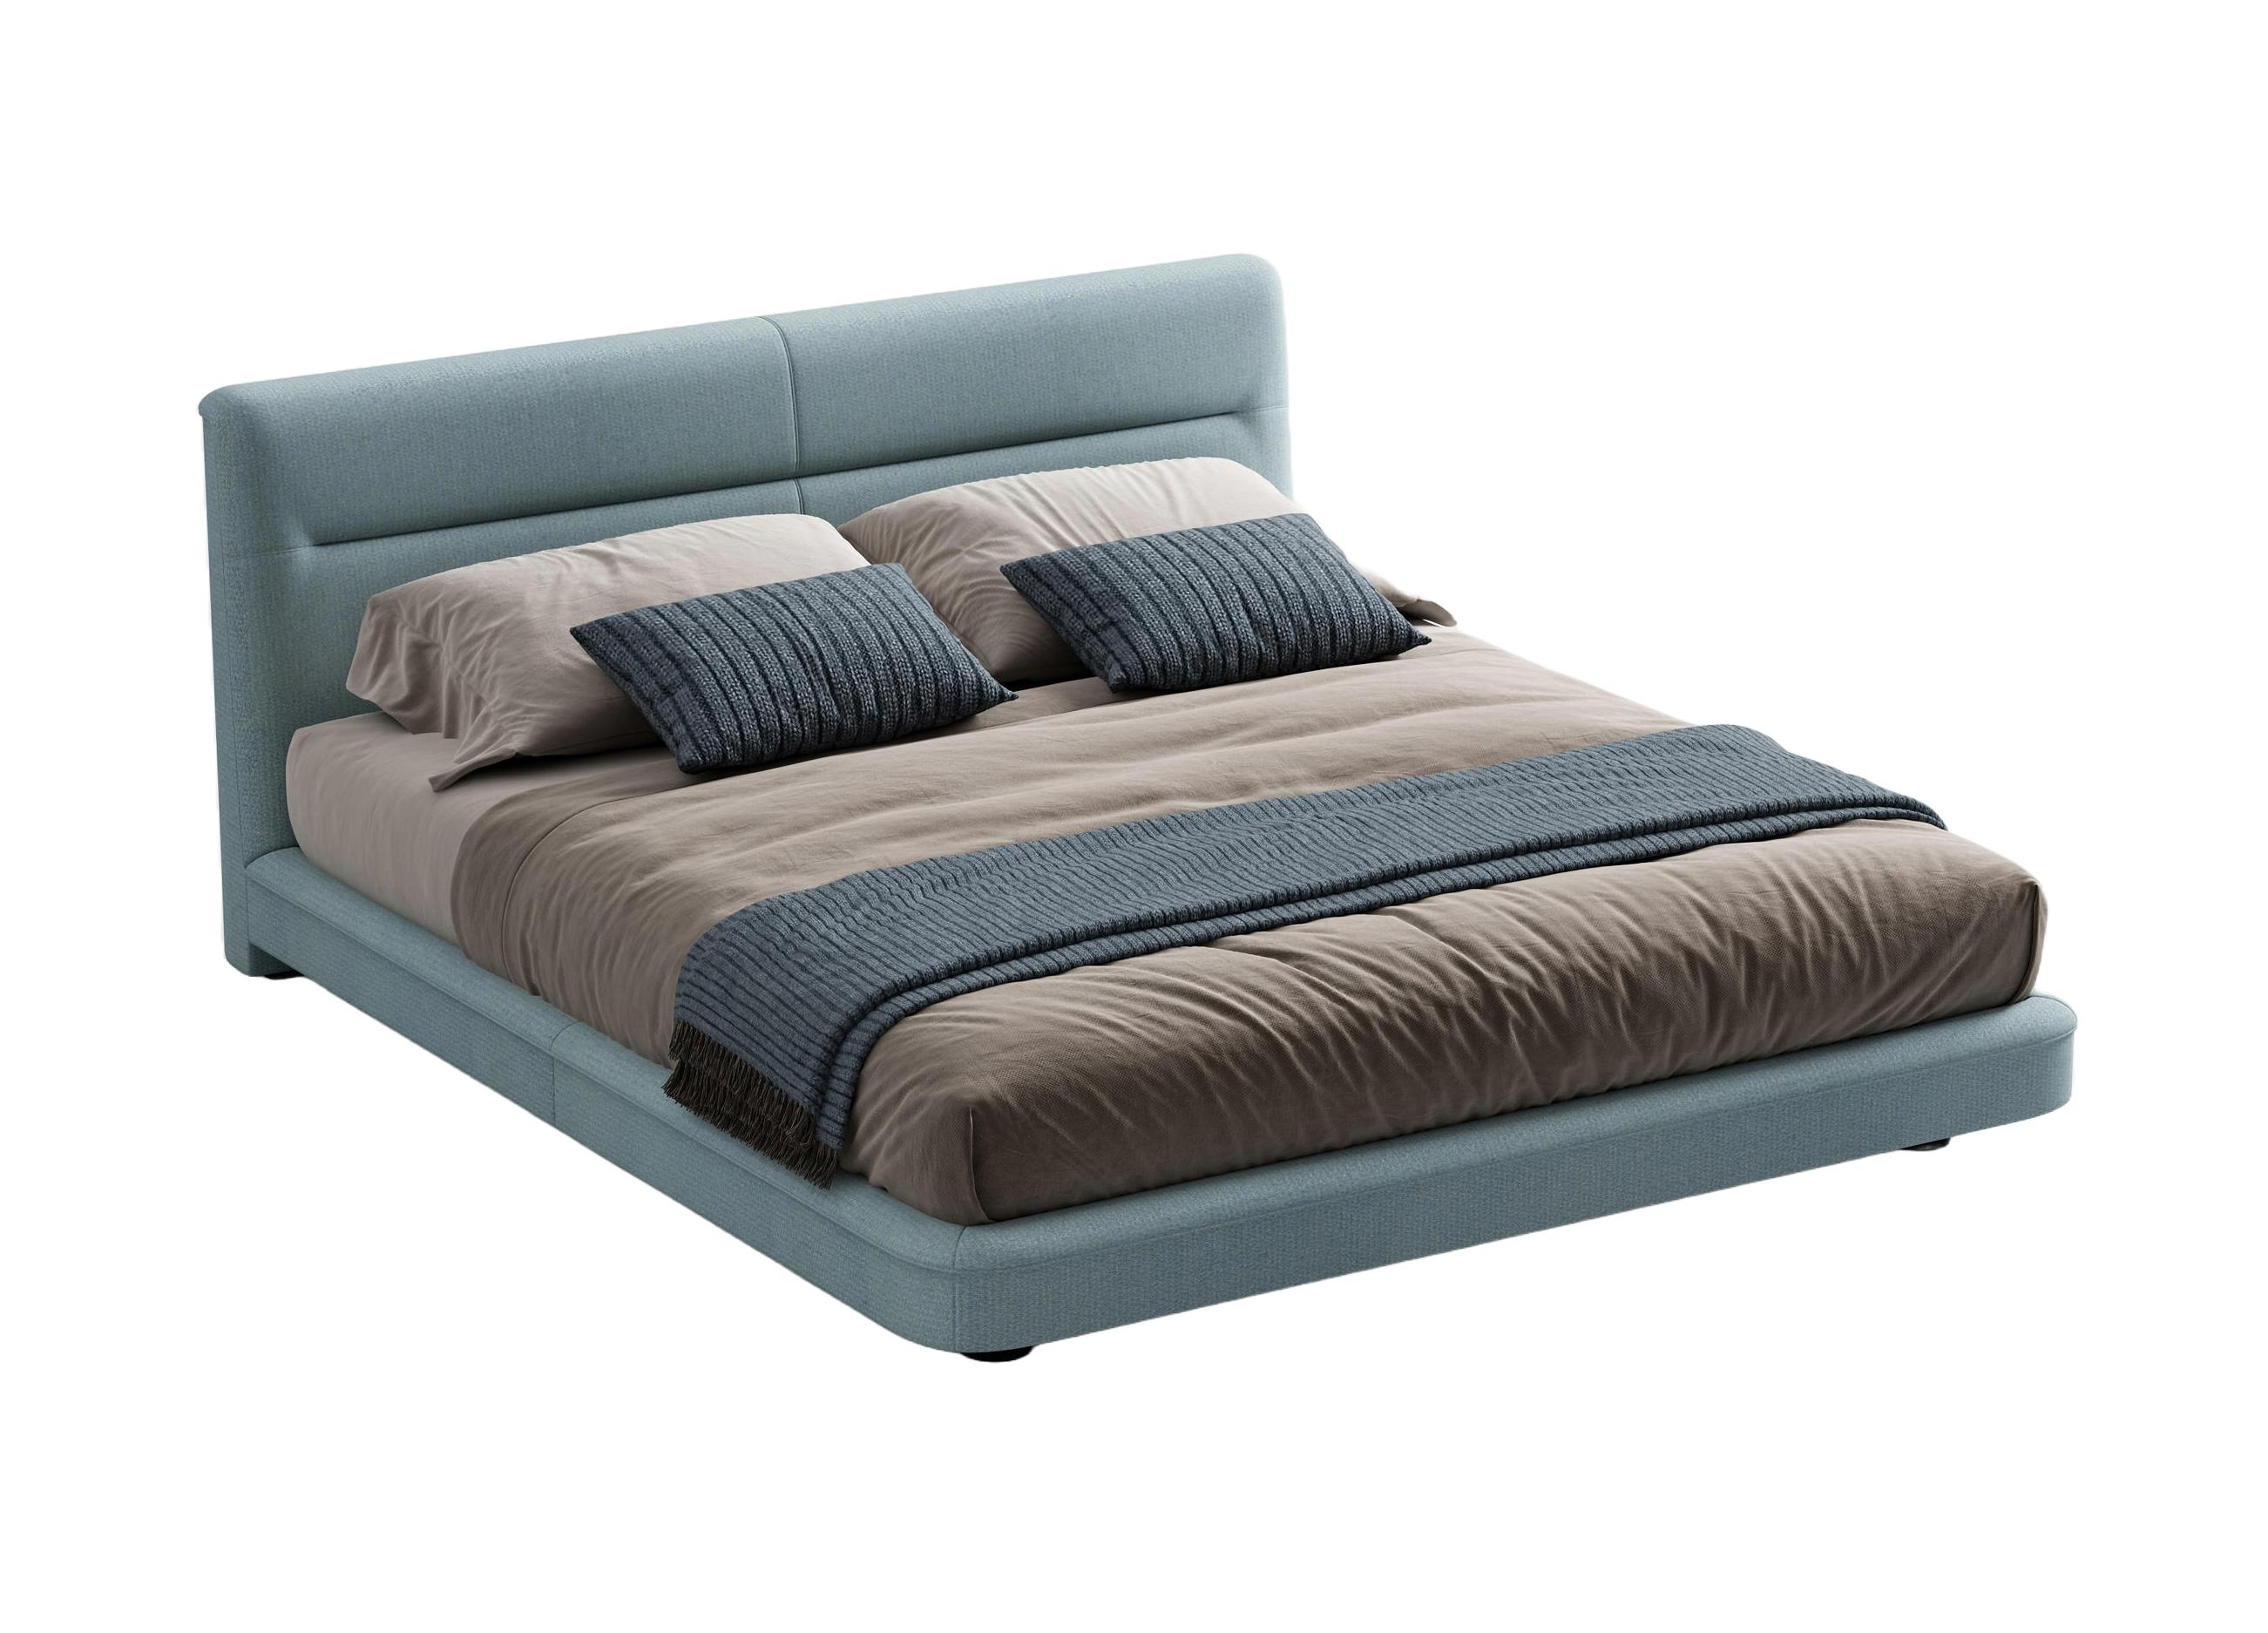 Clermont Modern Italian Bed ☞ Size: 180 x 200 cm